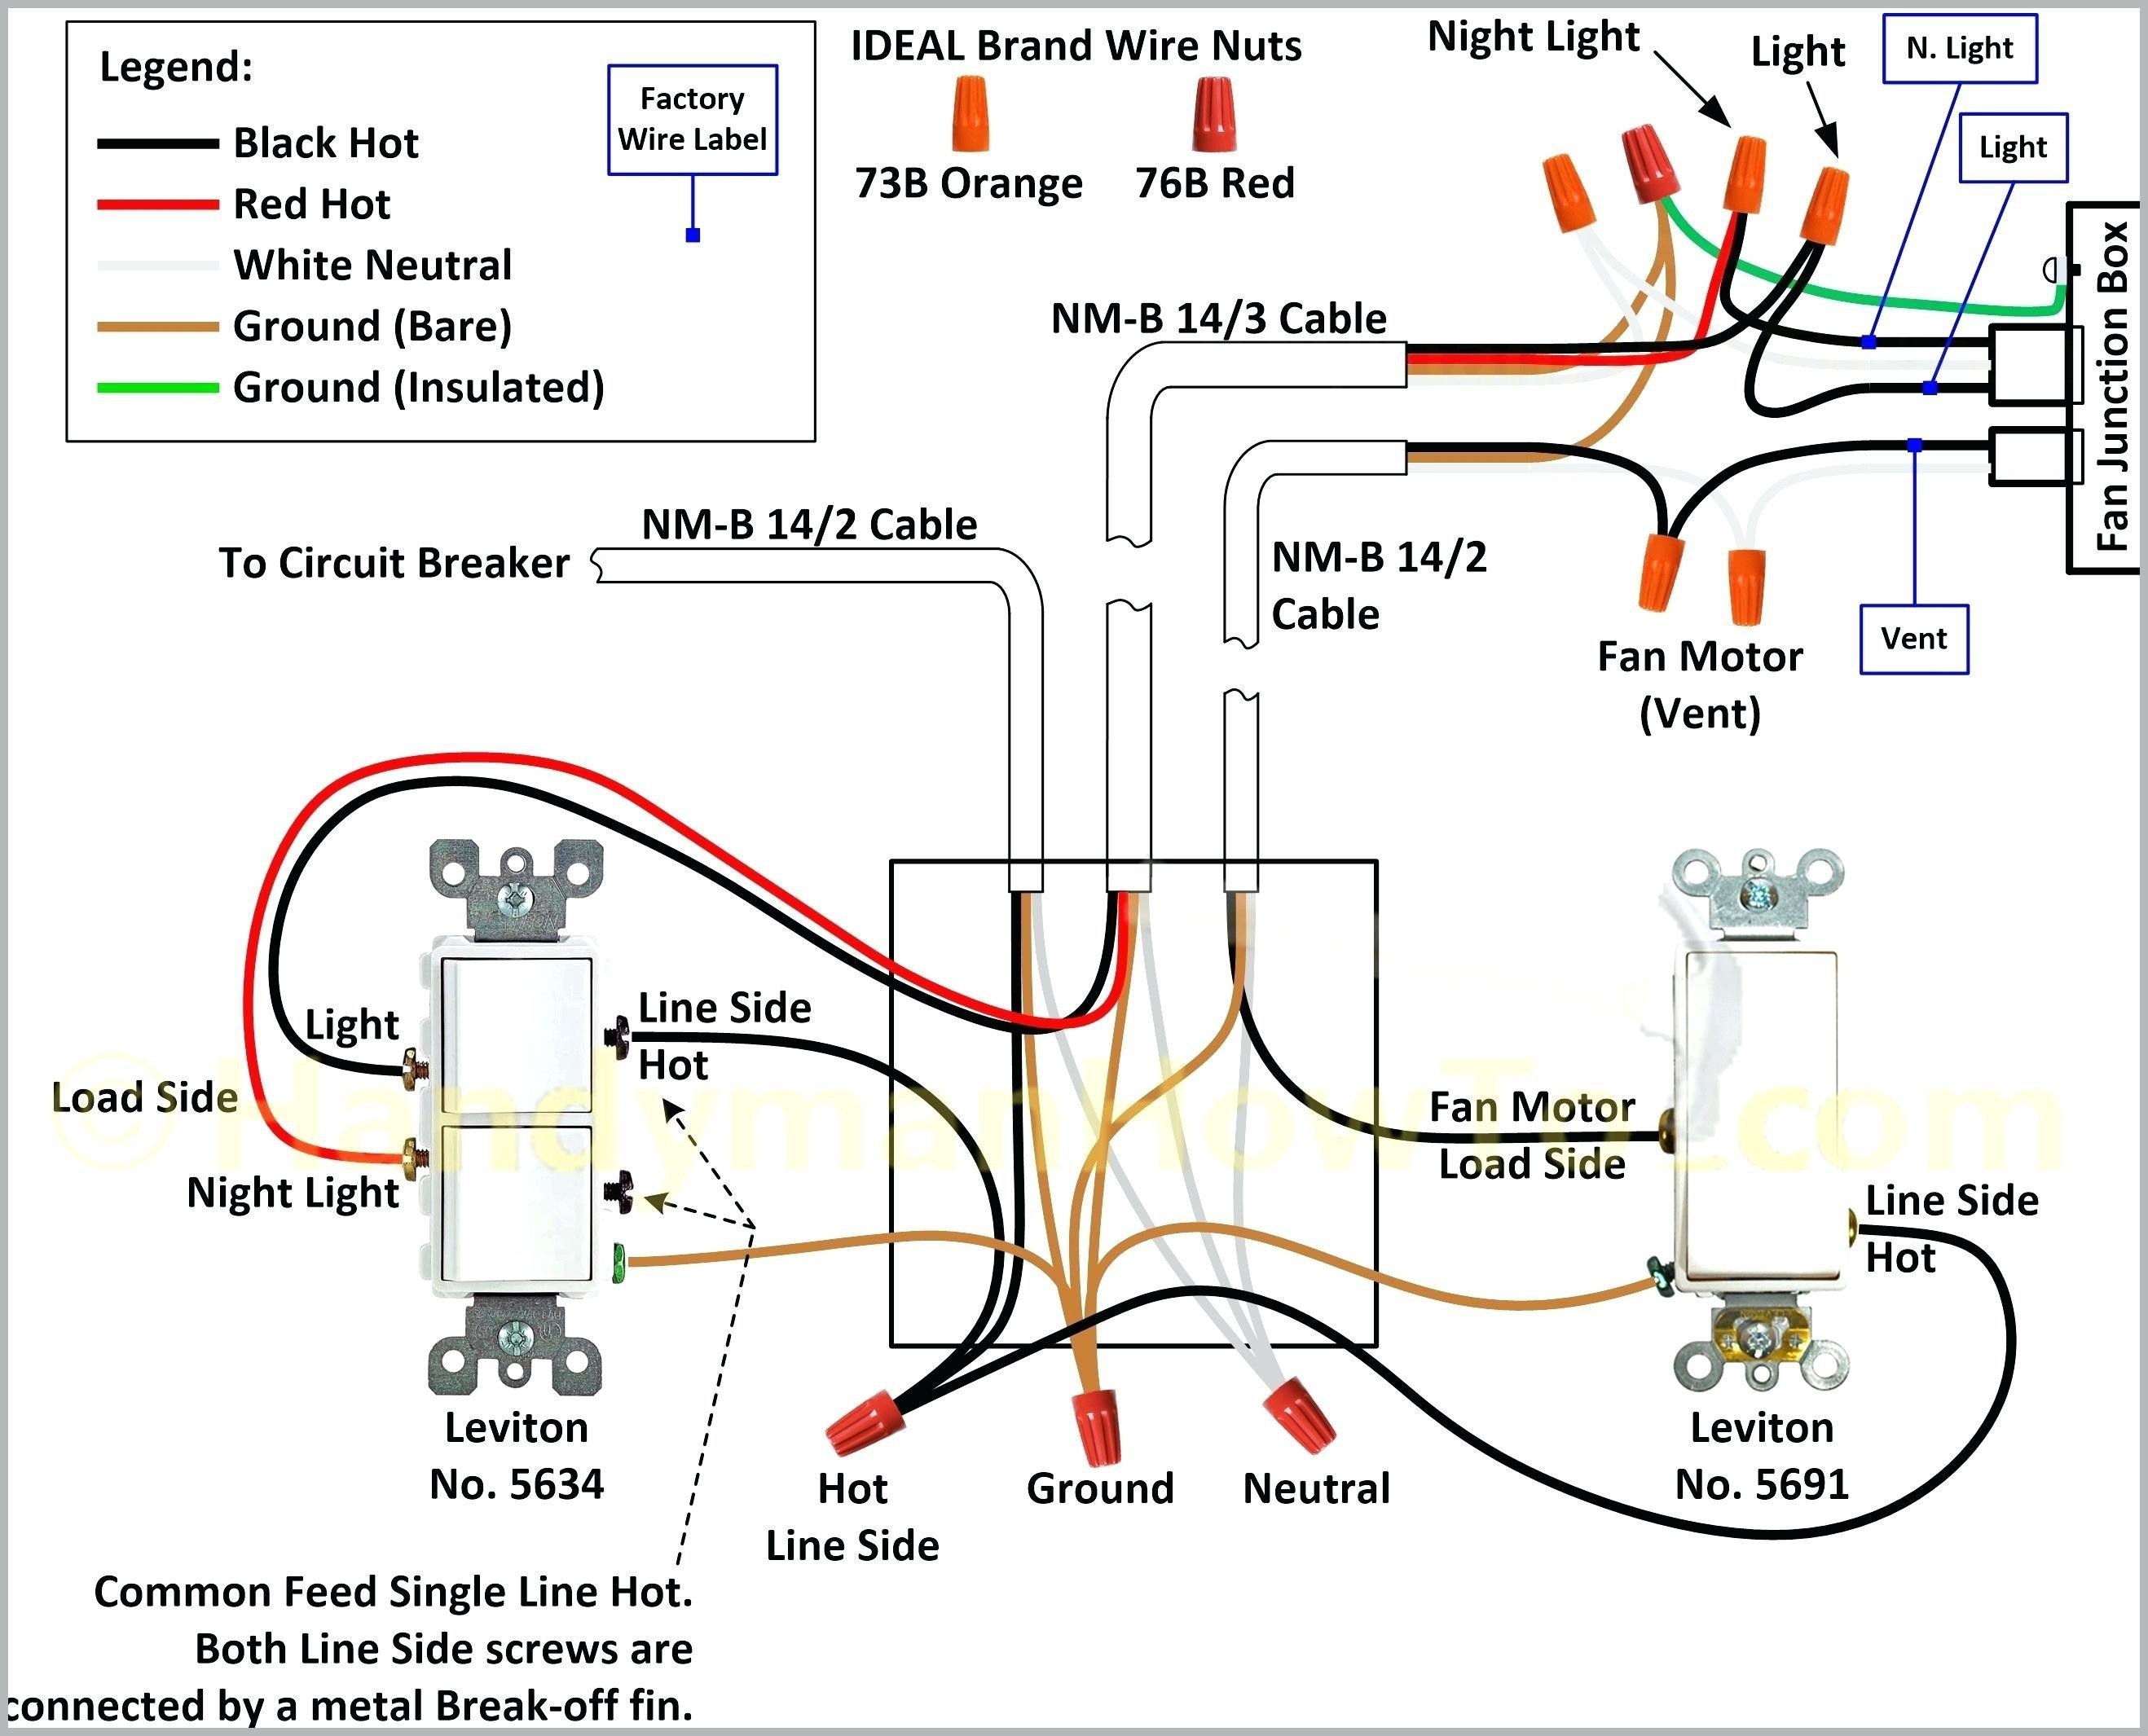 Fan Speed Switch Wiring Diagram New Switch Schematic Symbol • Electrical Outlet Symbol 2018 Of Fan Speed Switch Wiring Diagram